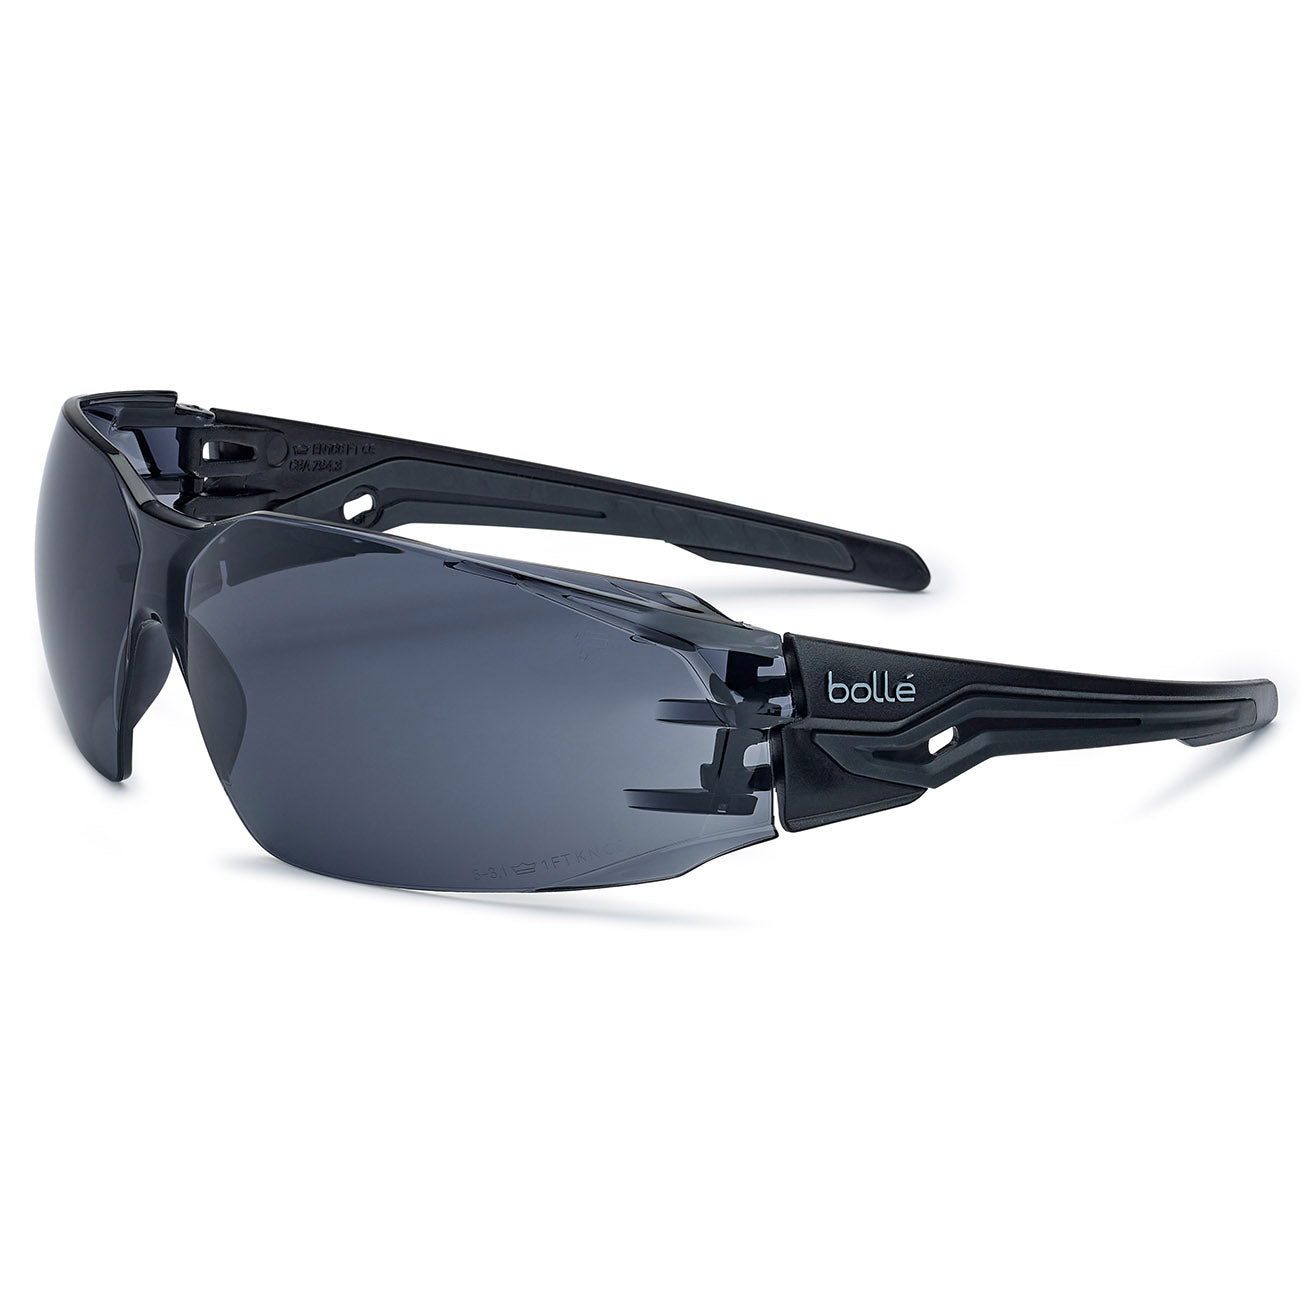 Bolle SILEX+ BSSI Smoke Lens Safety Glasses